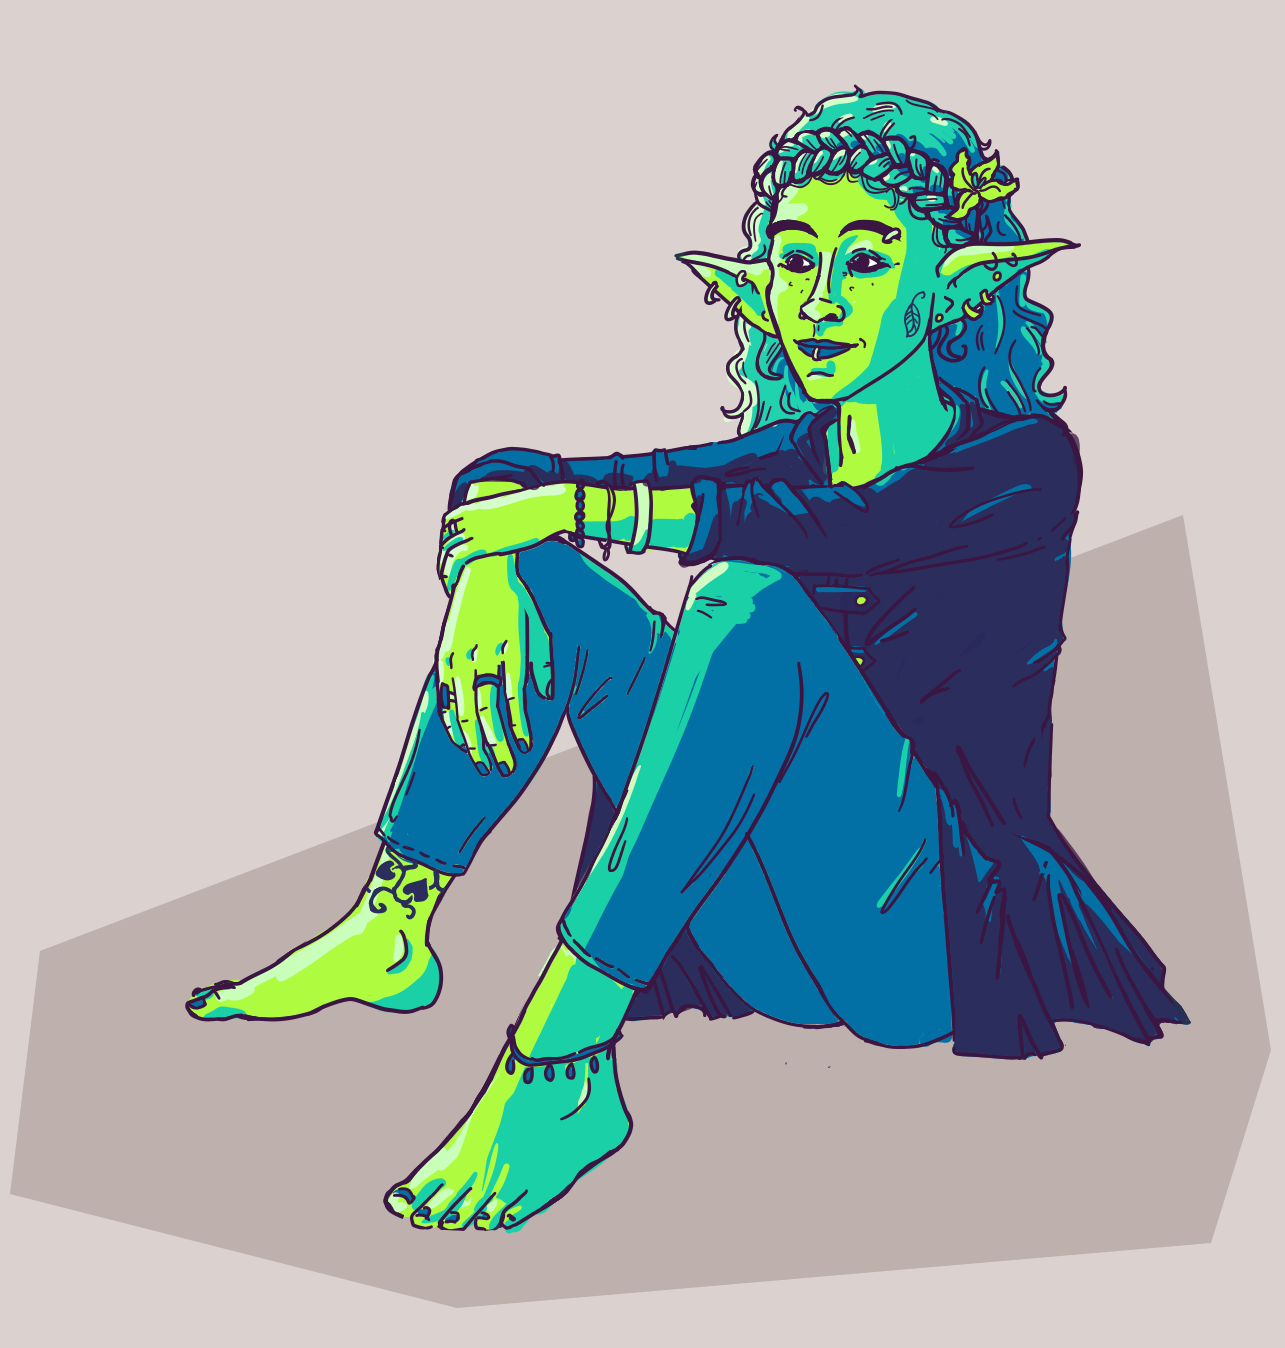 a half-elf half-goblin character sitting on the ground. he's barefoot, wearing leggings and a kinda-fancy coat, and has several ear piercings, a lip ring, and lots of jewellery. he has long wavy hair with crown braids.